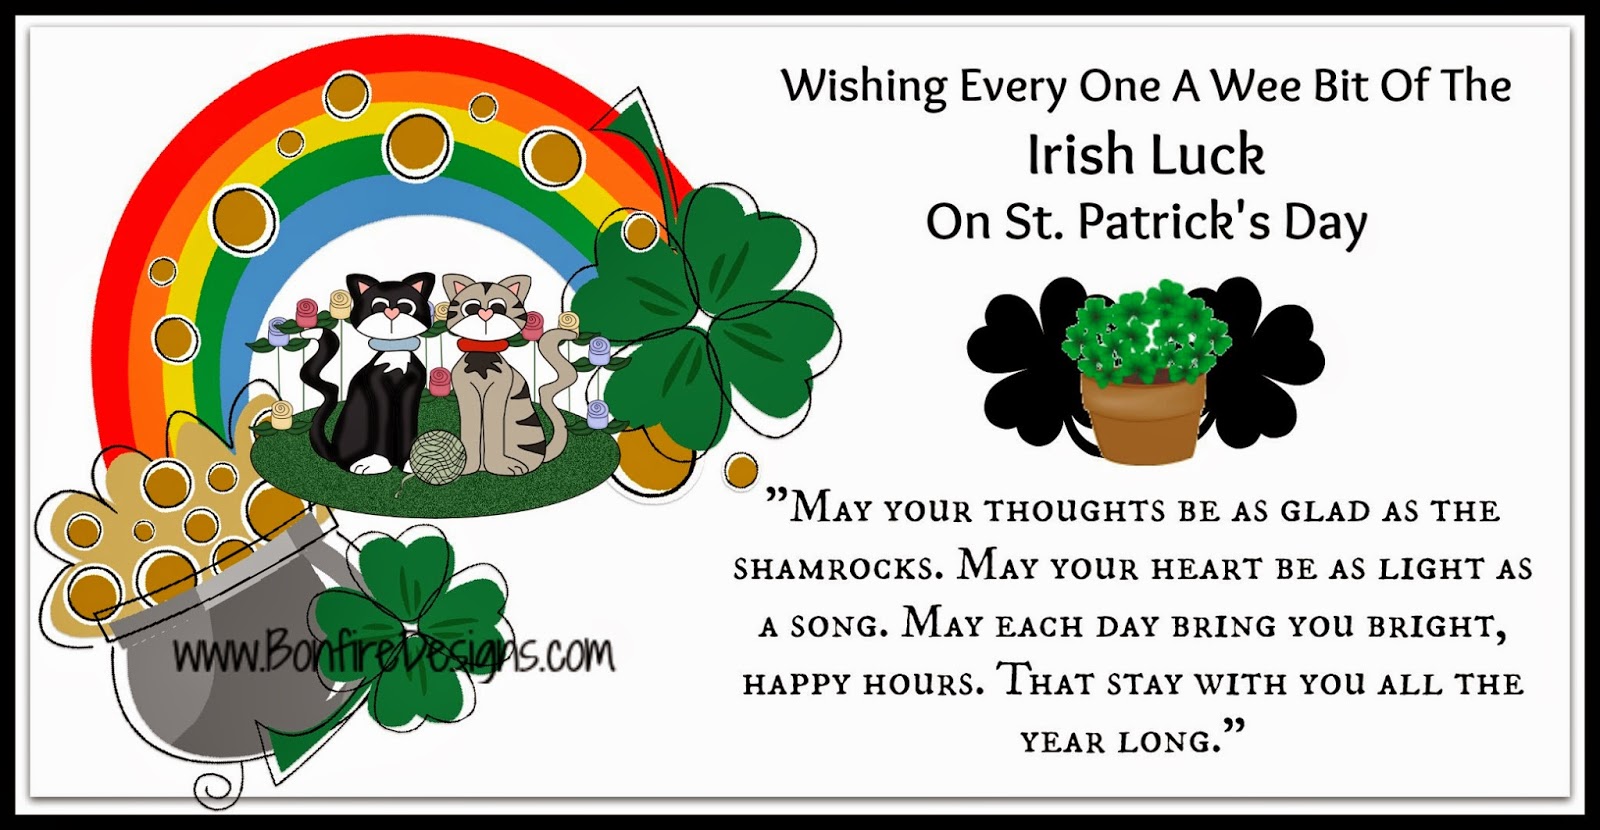  Happy St Patrick's Day To All Of My Irish Friends and to Everyone, because I'm pretty sure everyone has a little Irish Pride and Temper In Them!